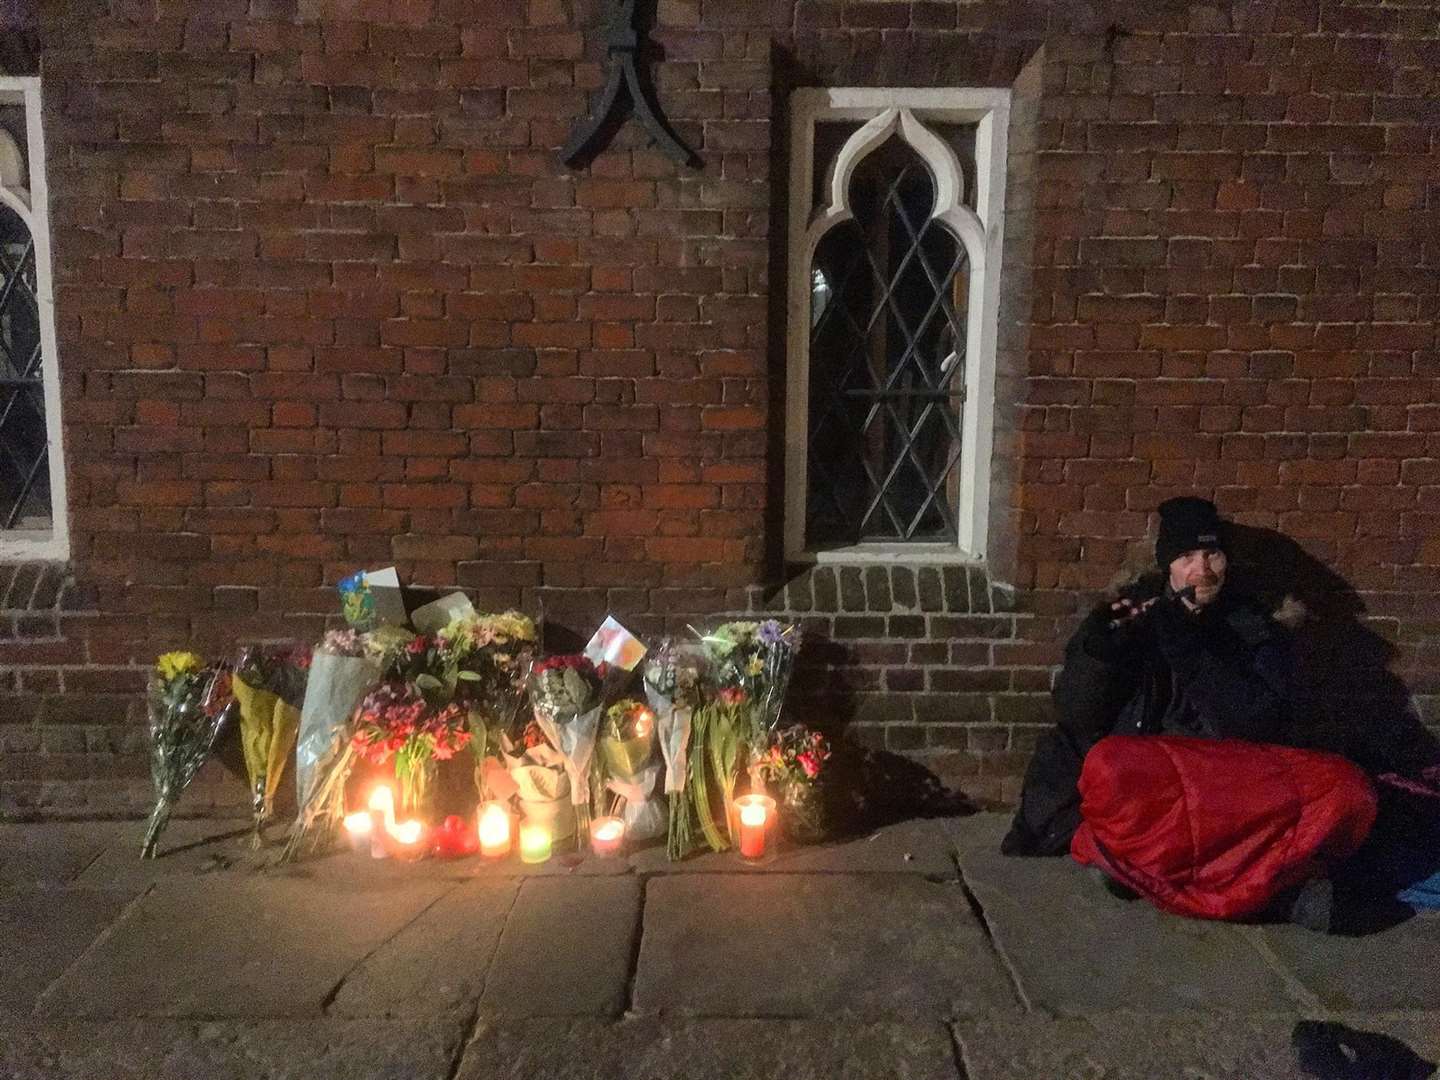 Flowers and candles were laid where Shelly Pollard tragically died